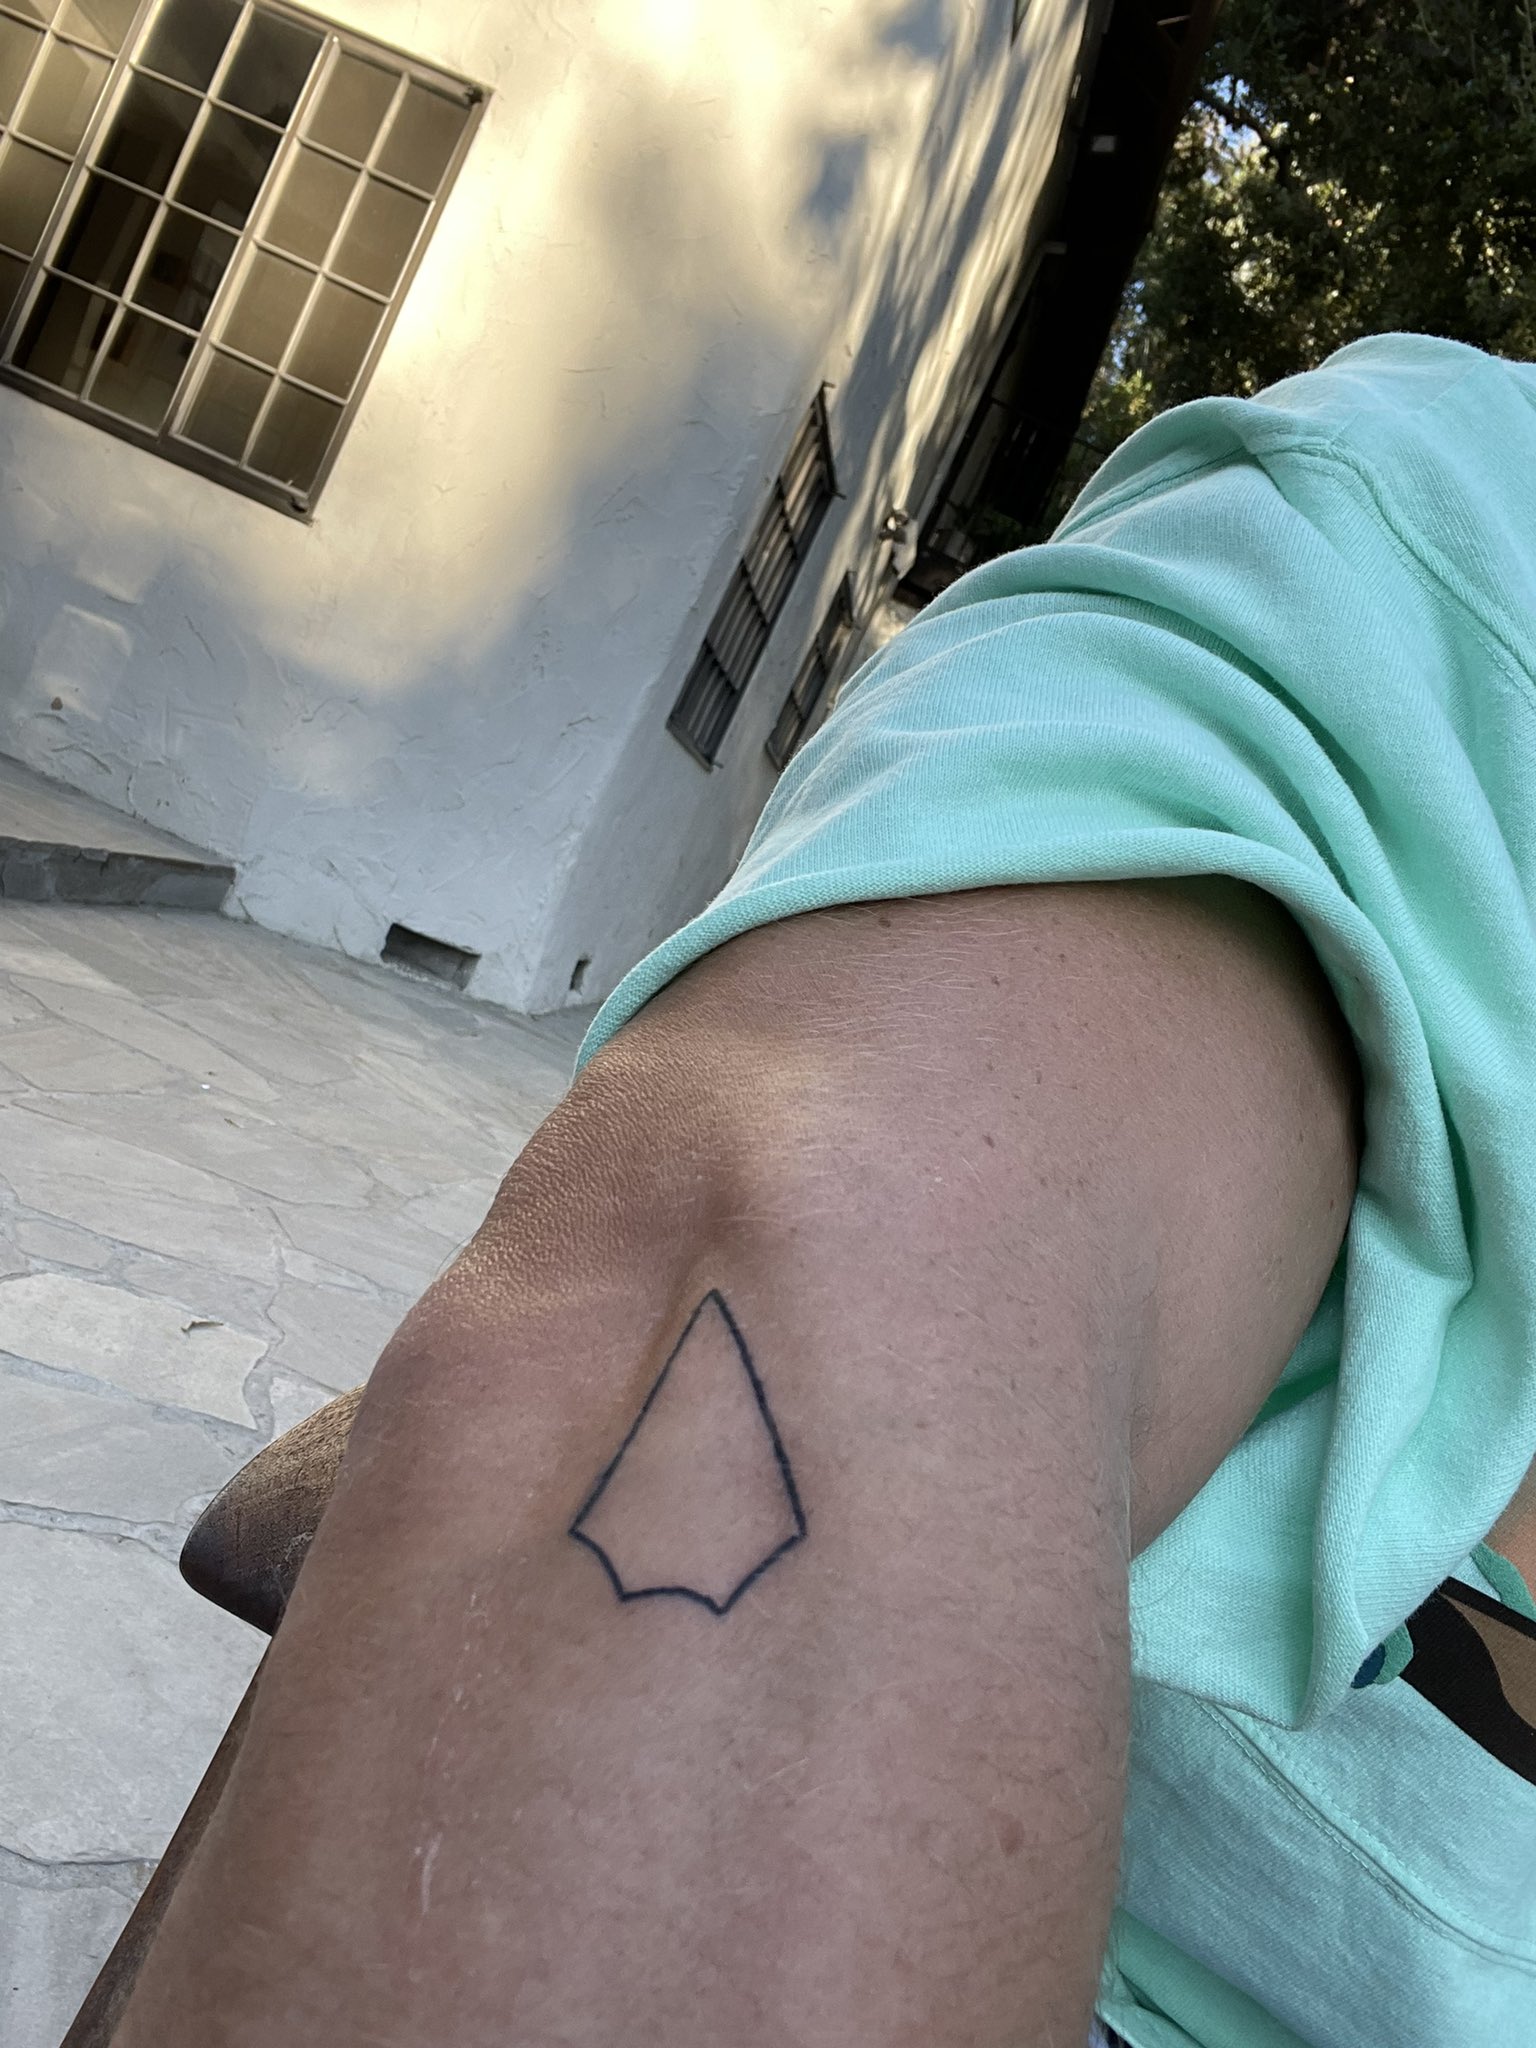 69 Striking Arrow Tattoos With Meaning - Our Mindful Life